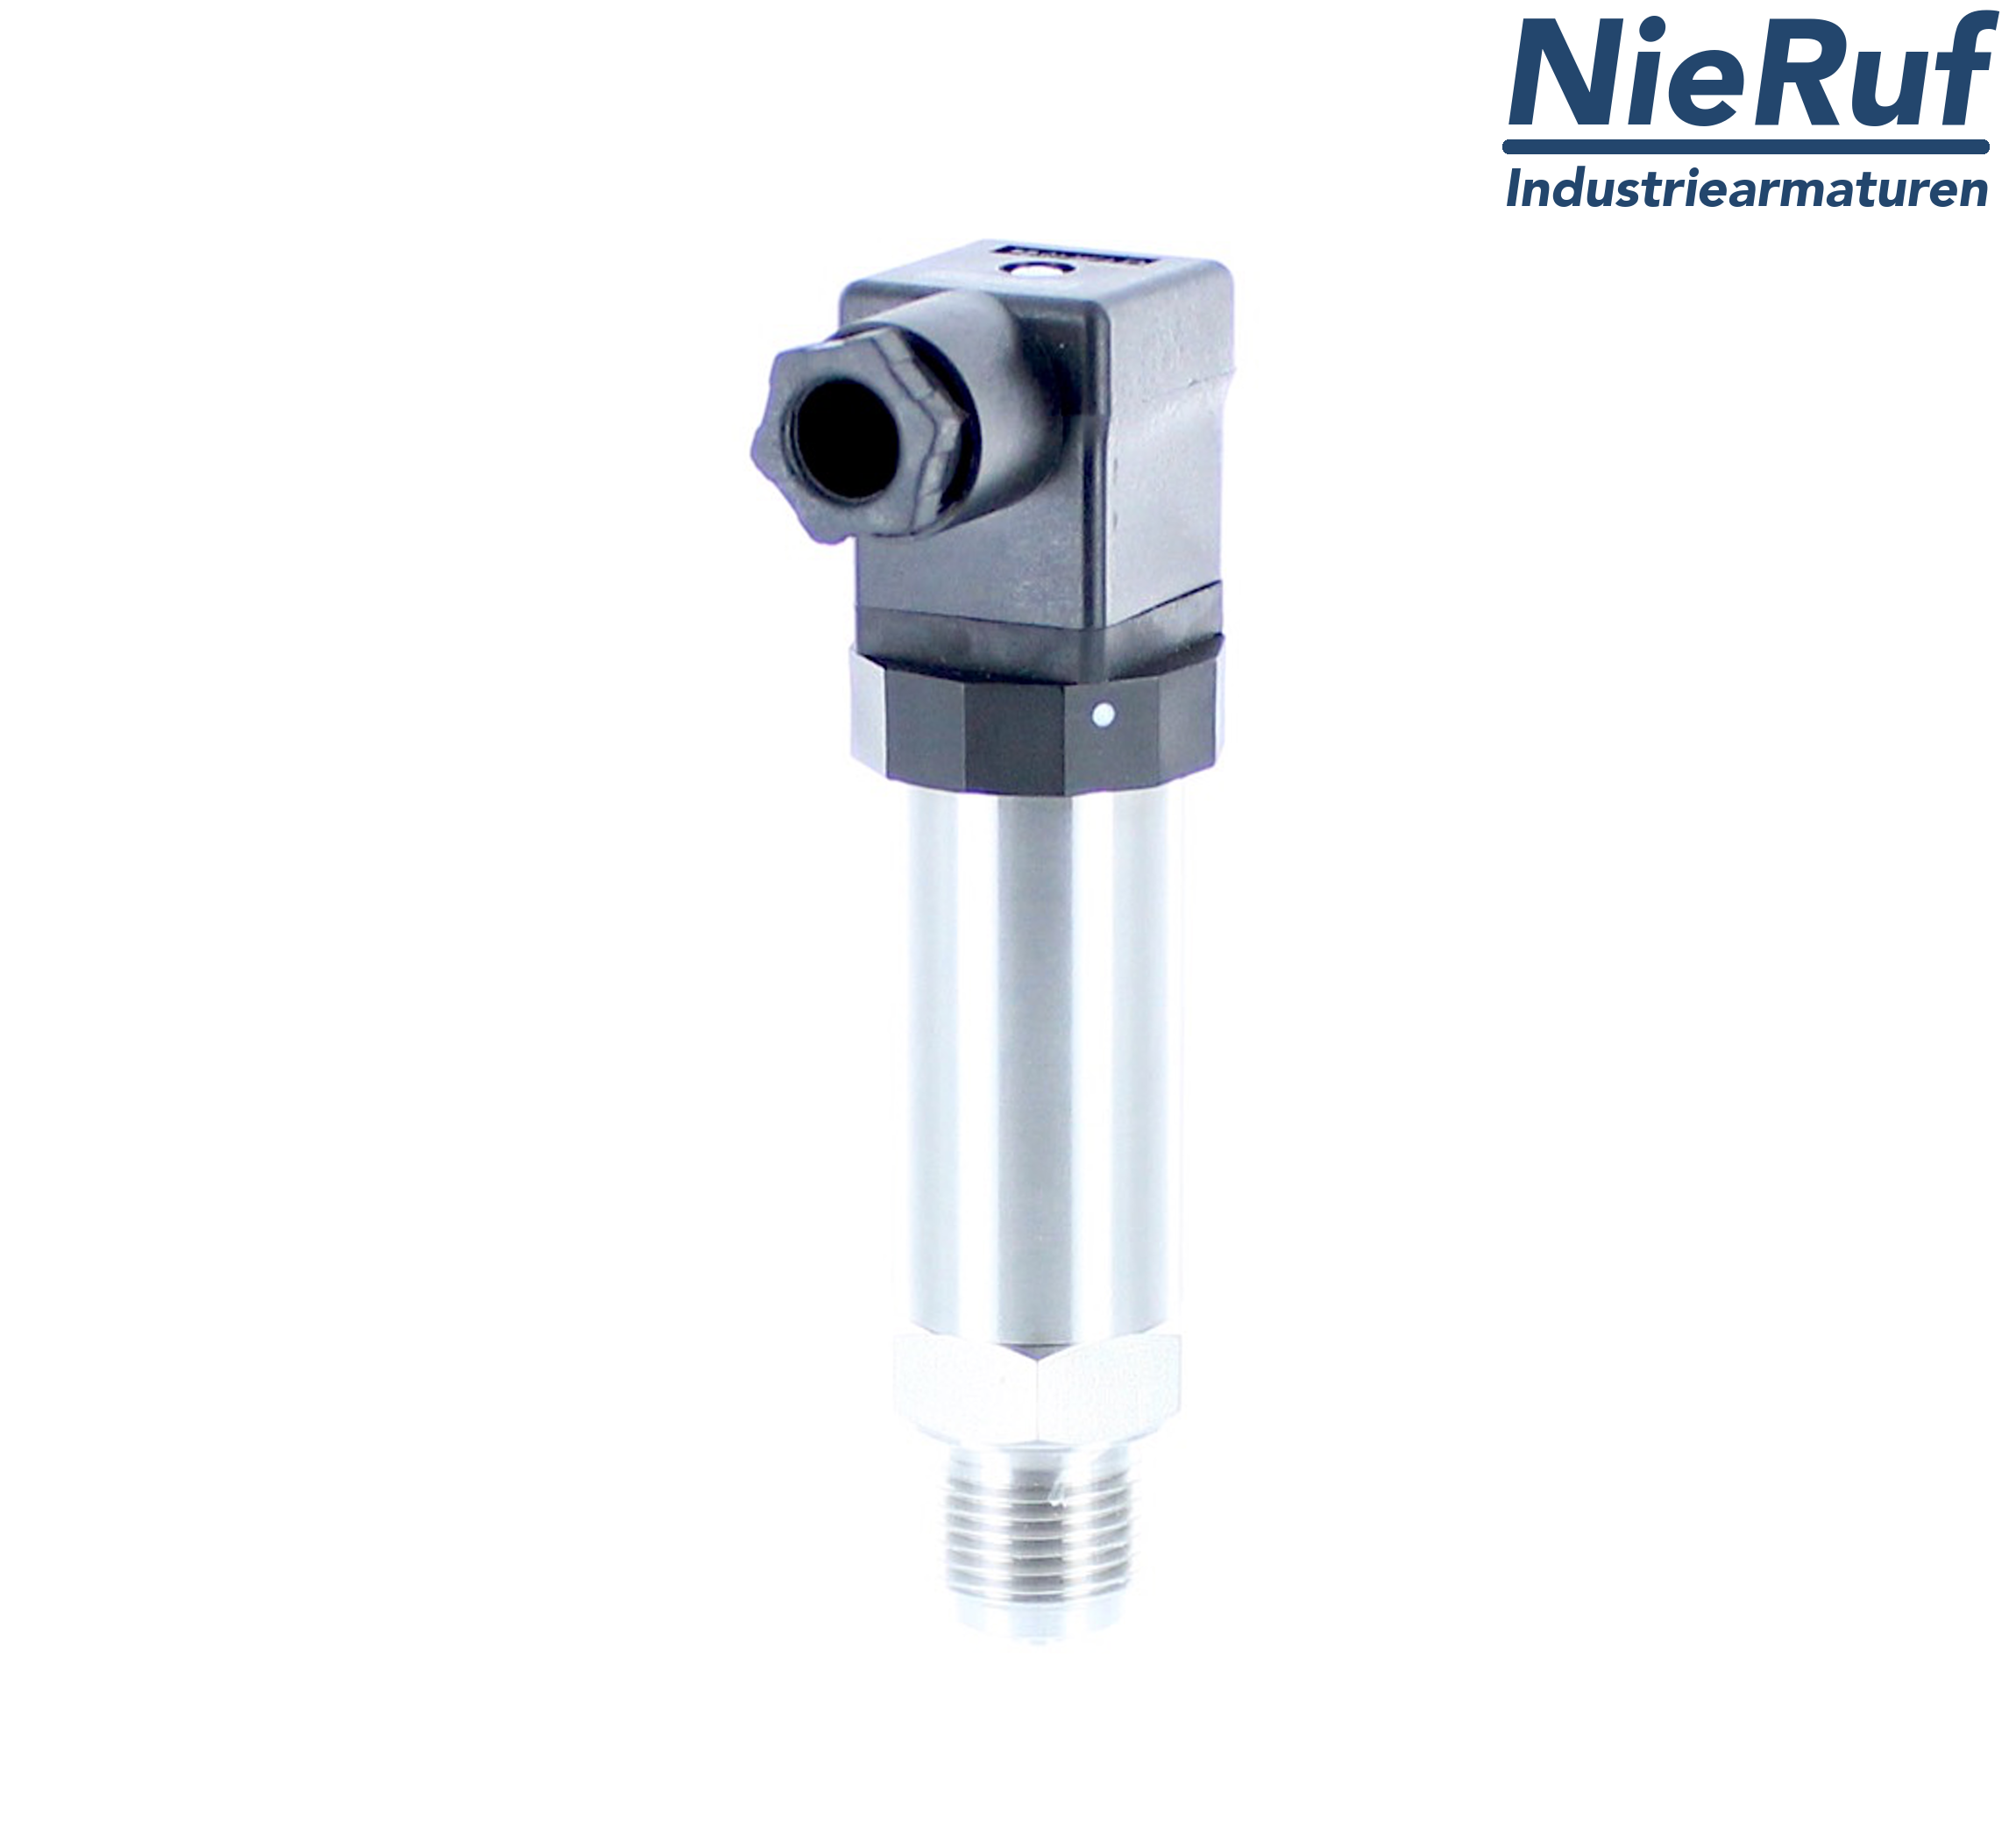 pressure sensor G 1/4" B DS01 stainless steel 2-wire: 4-20mA FPM 0,0 - 40,0 bar